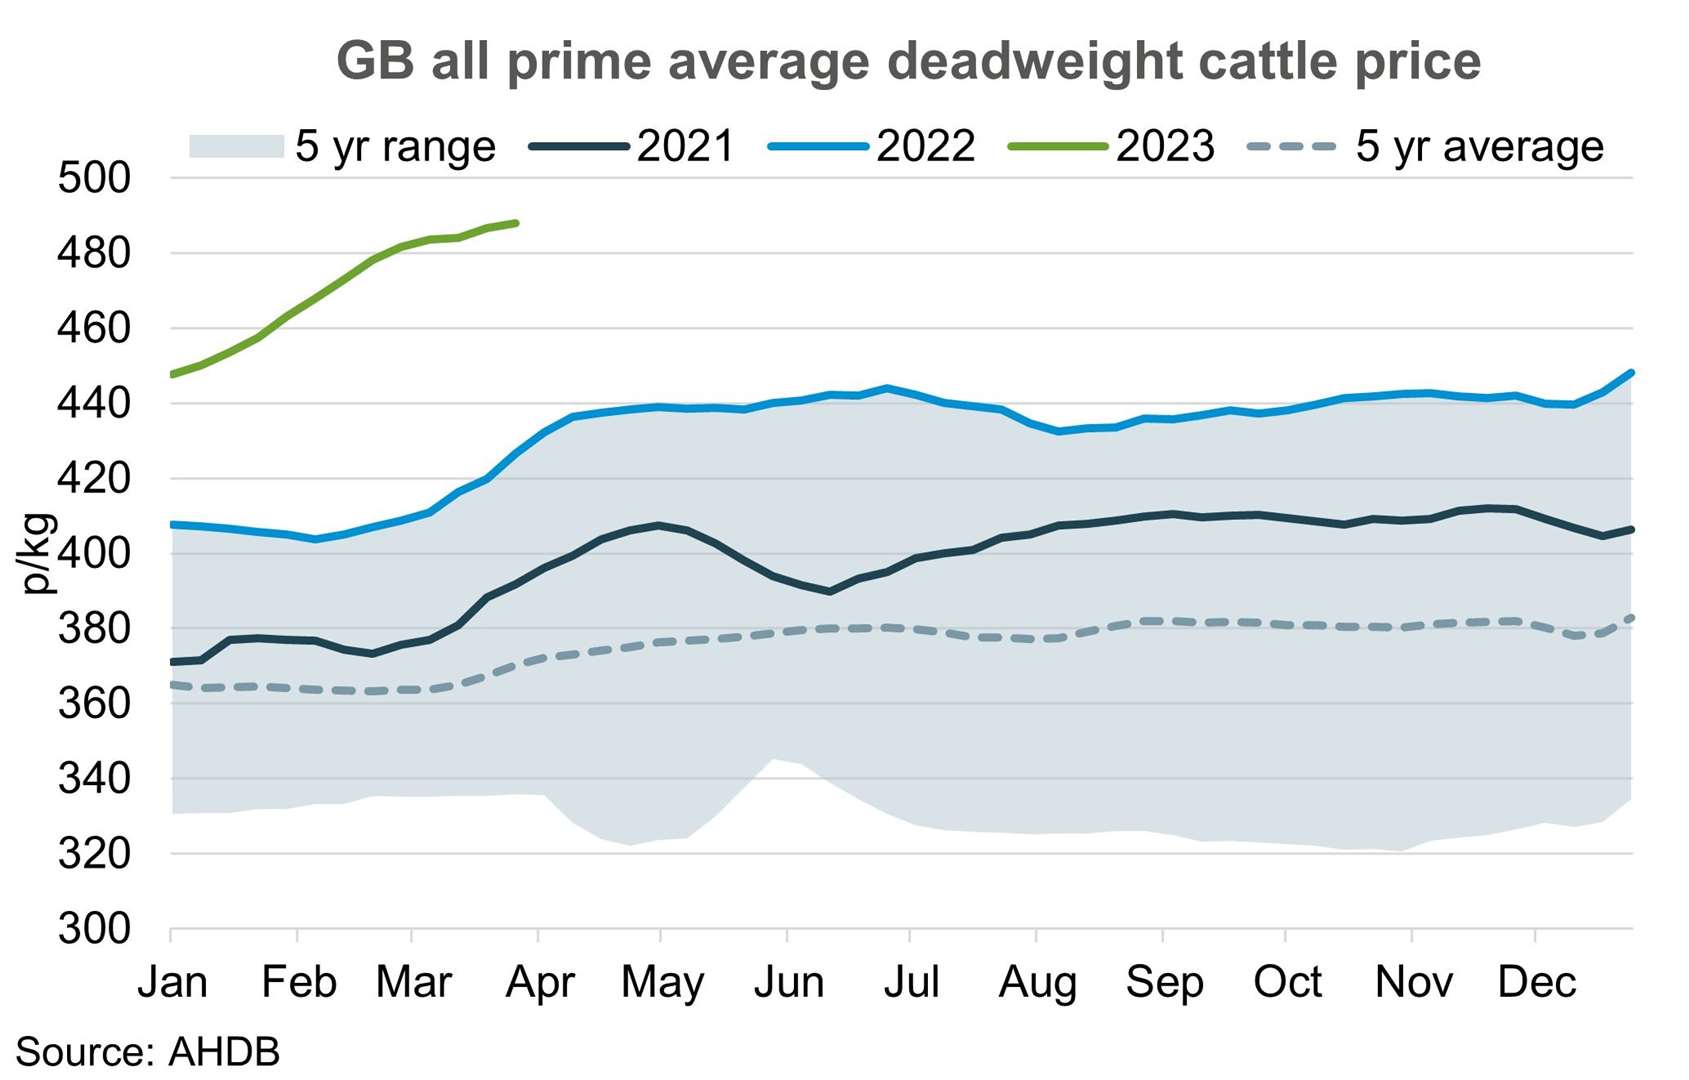 Average cattle deadweight prices